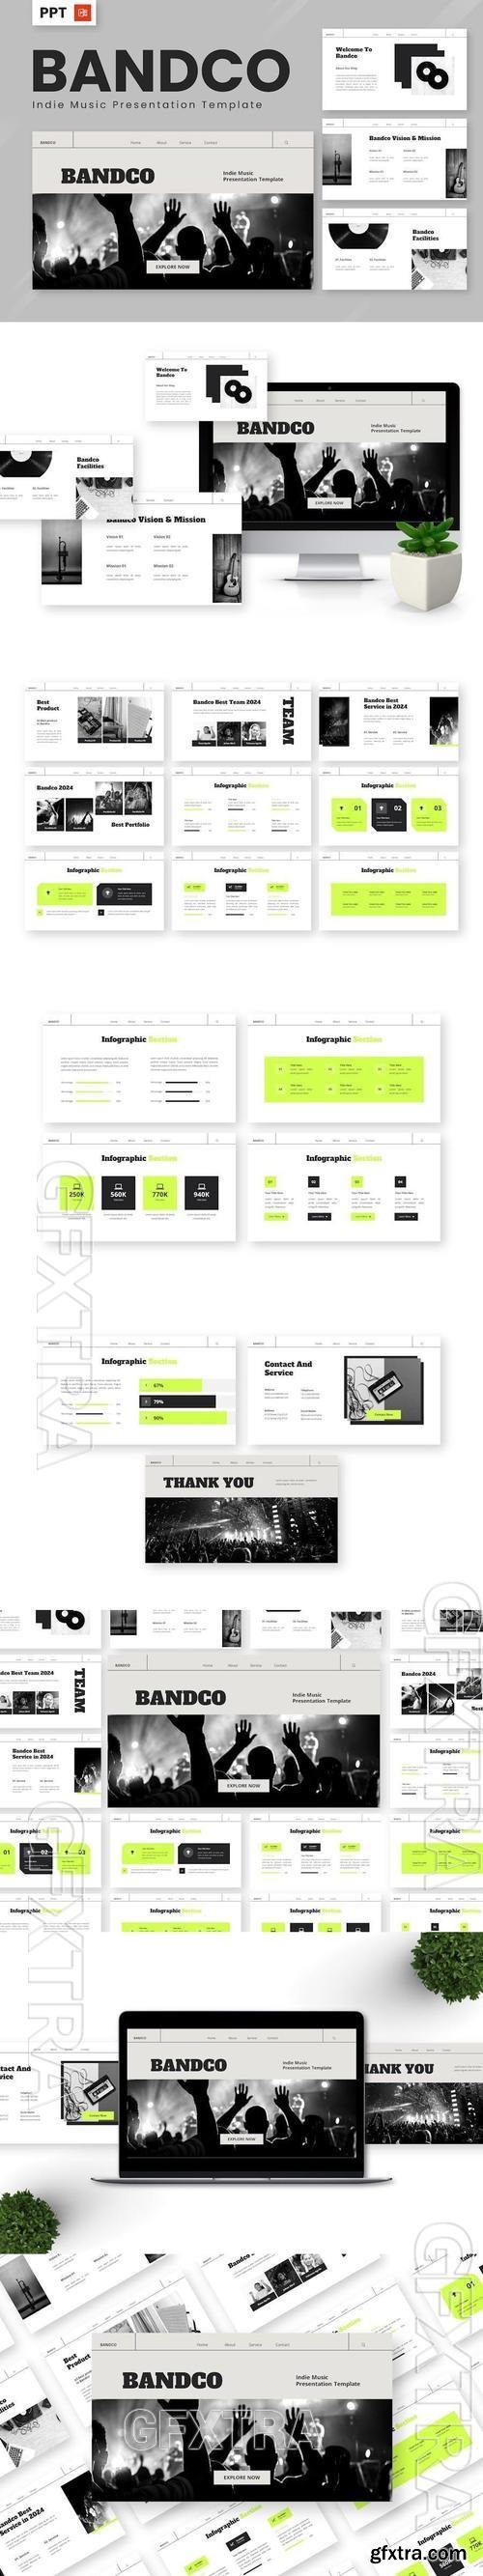 Bandco - Indie Music Powerpoint Templates SX9GJKQ